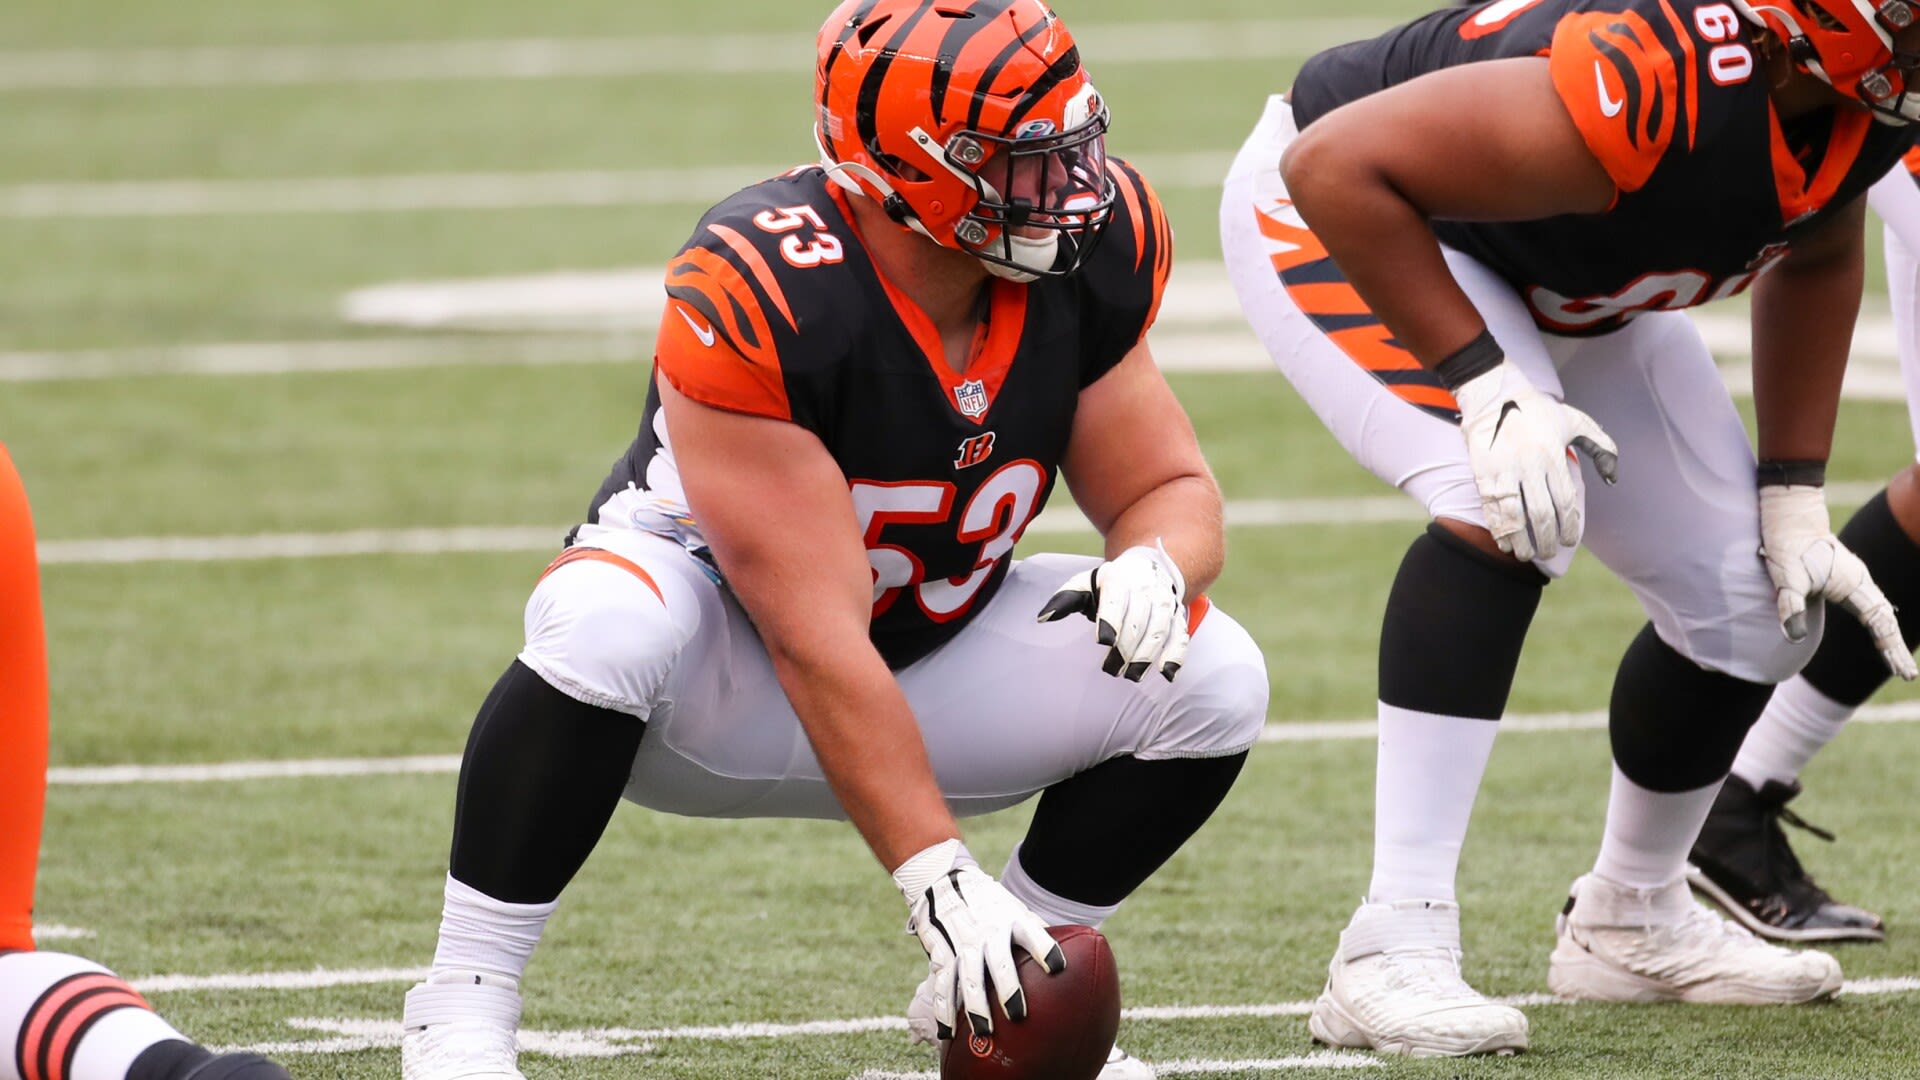 Former Bengals first-round pick Billy Price retires at 29 because of health scare